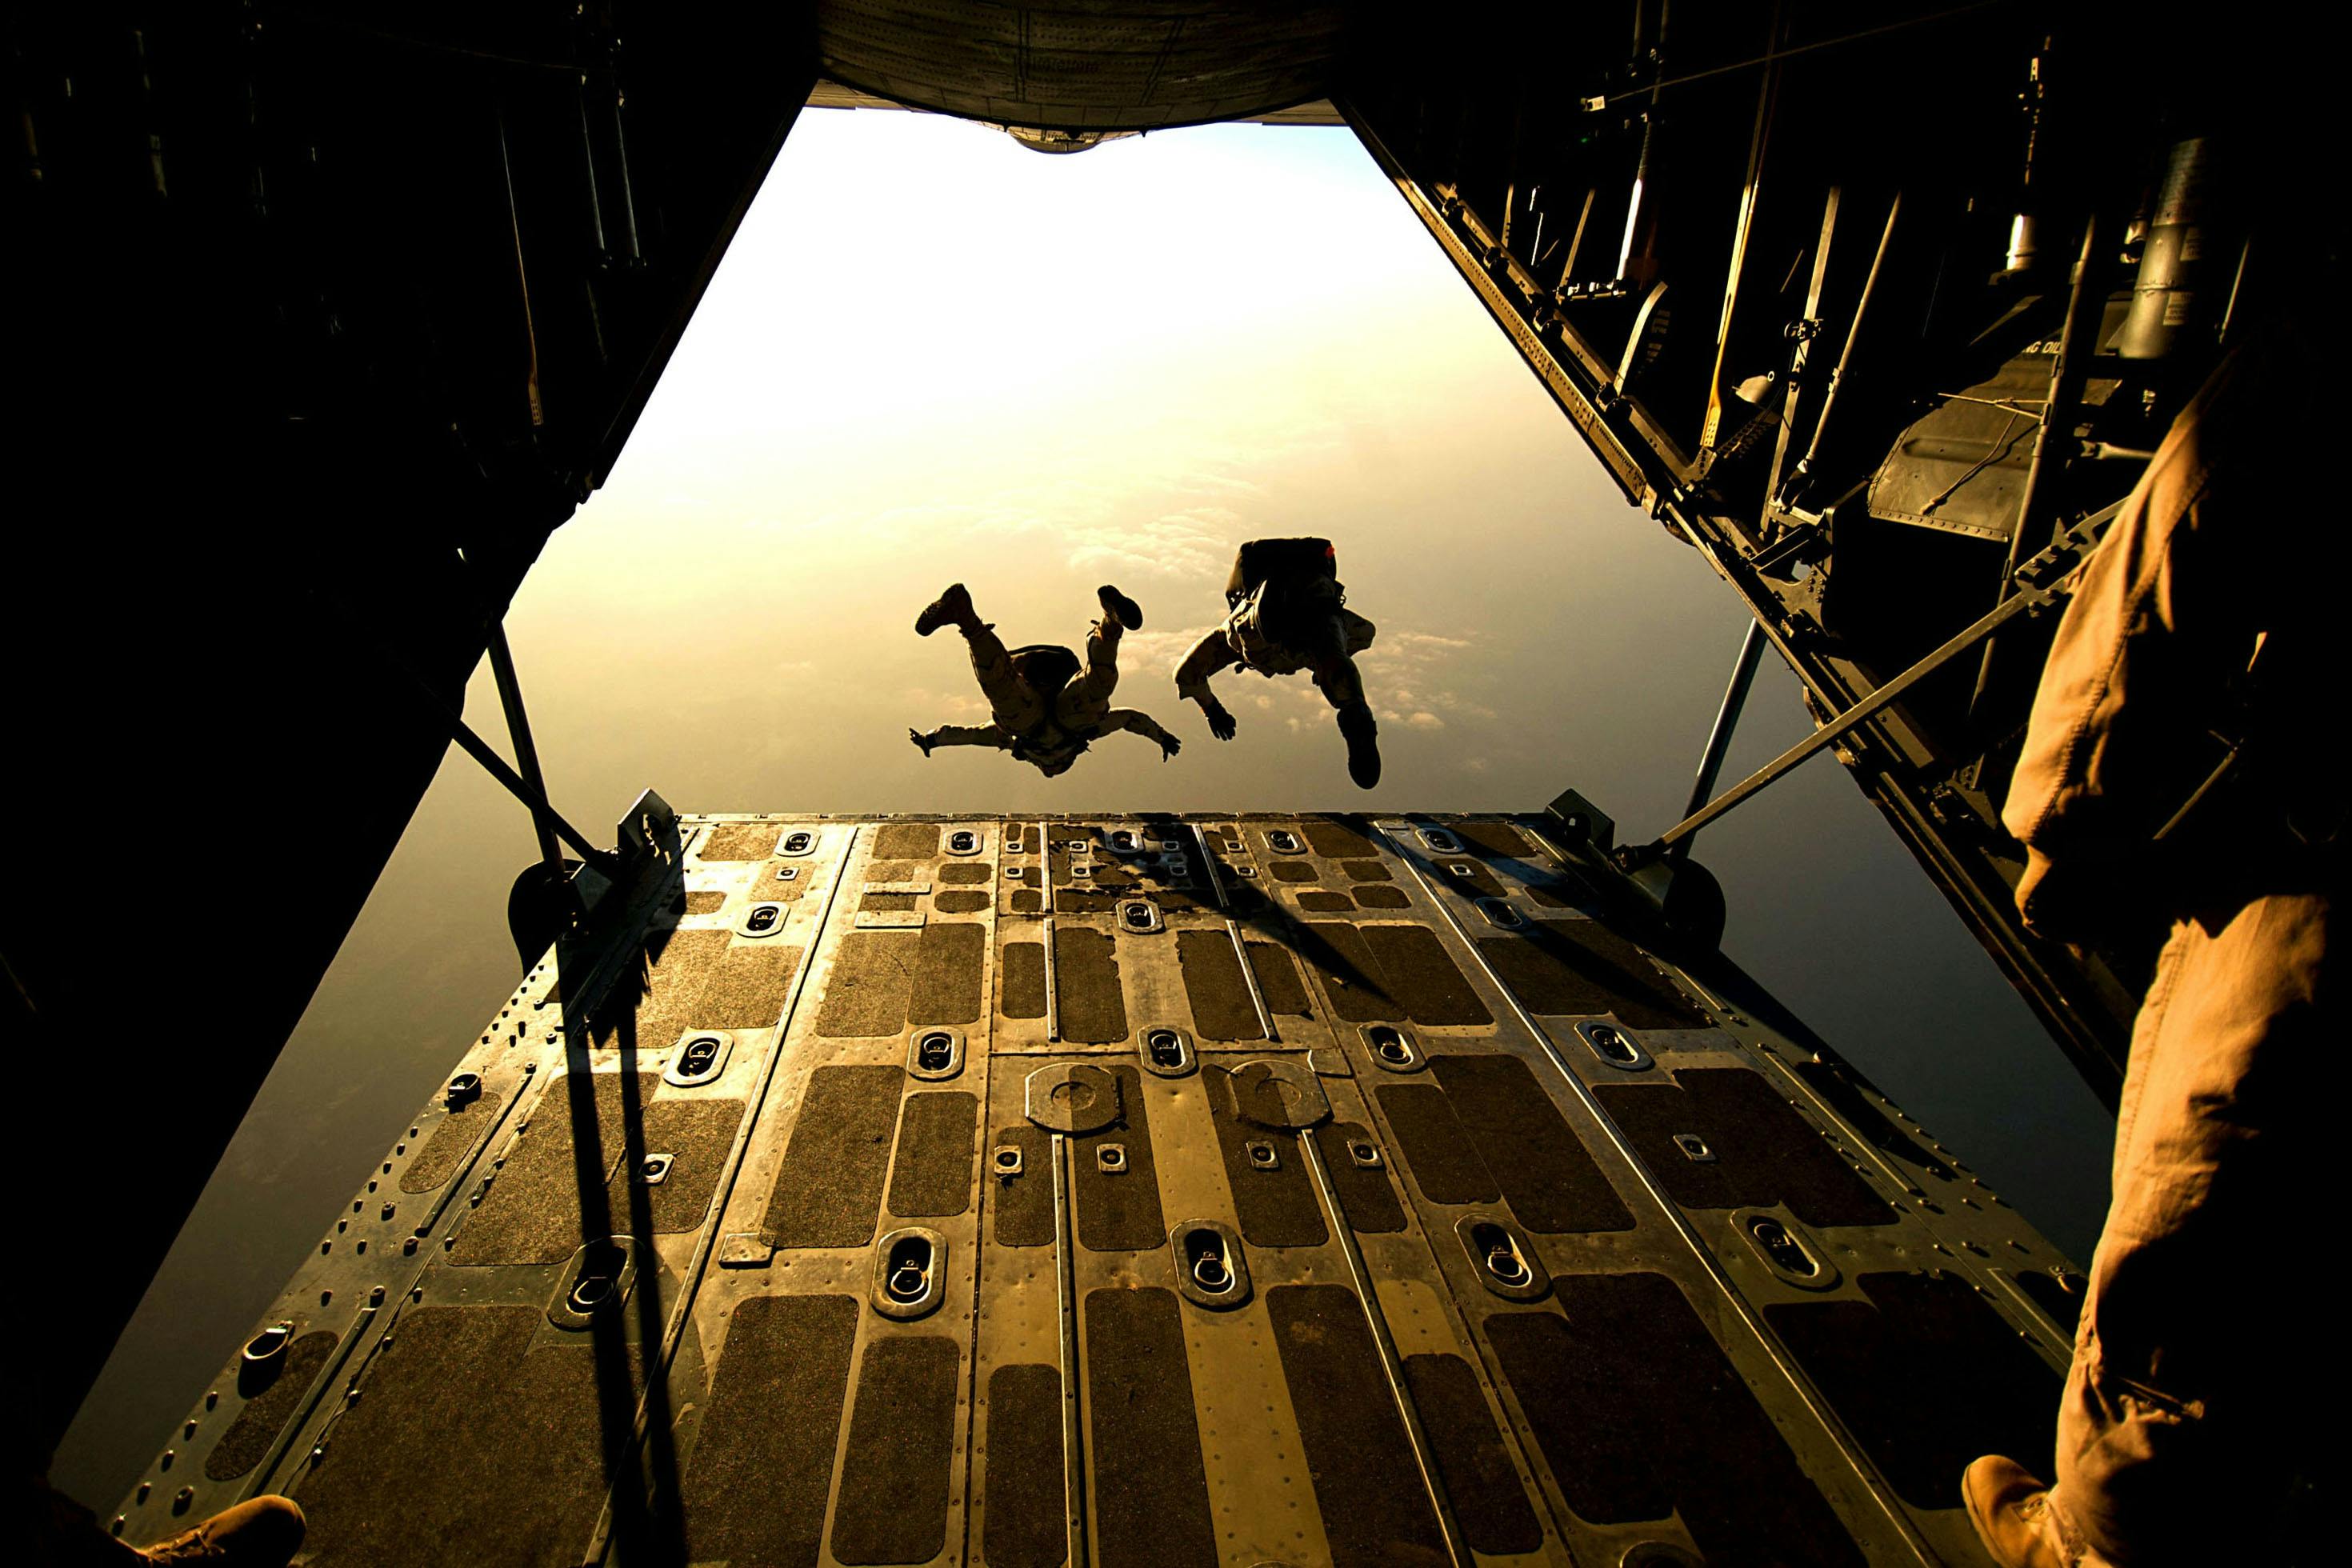 2560x1600 / 2560x1600 free download pictures of skydiving -  Coolwallpapers.me!